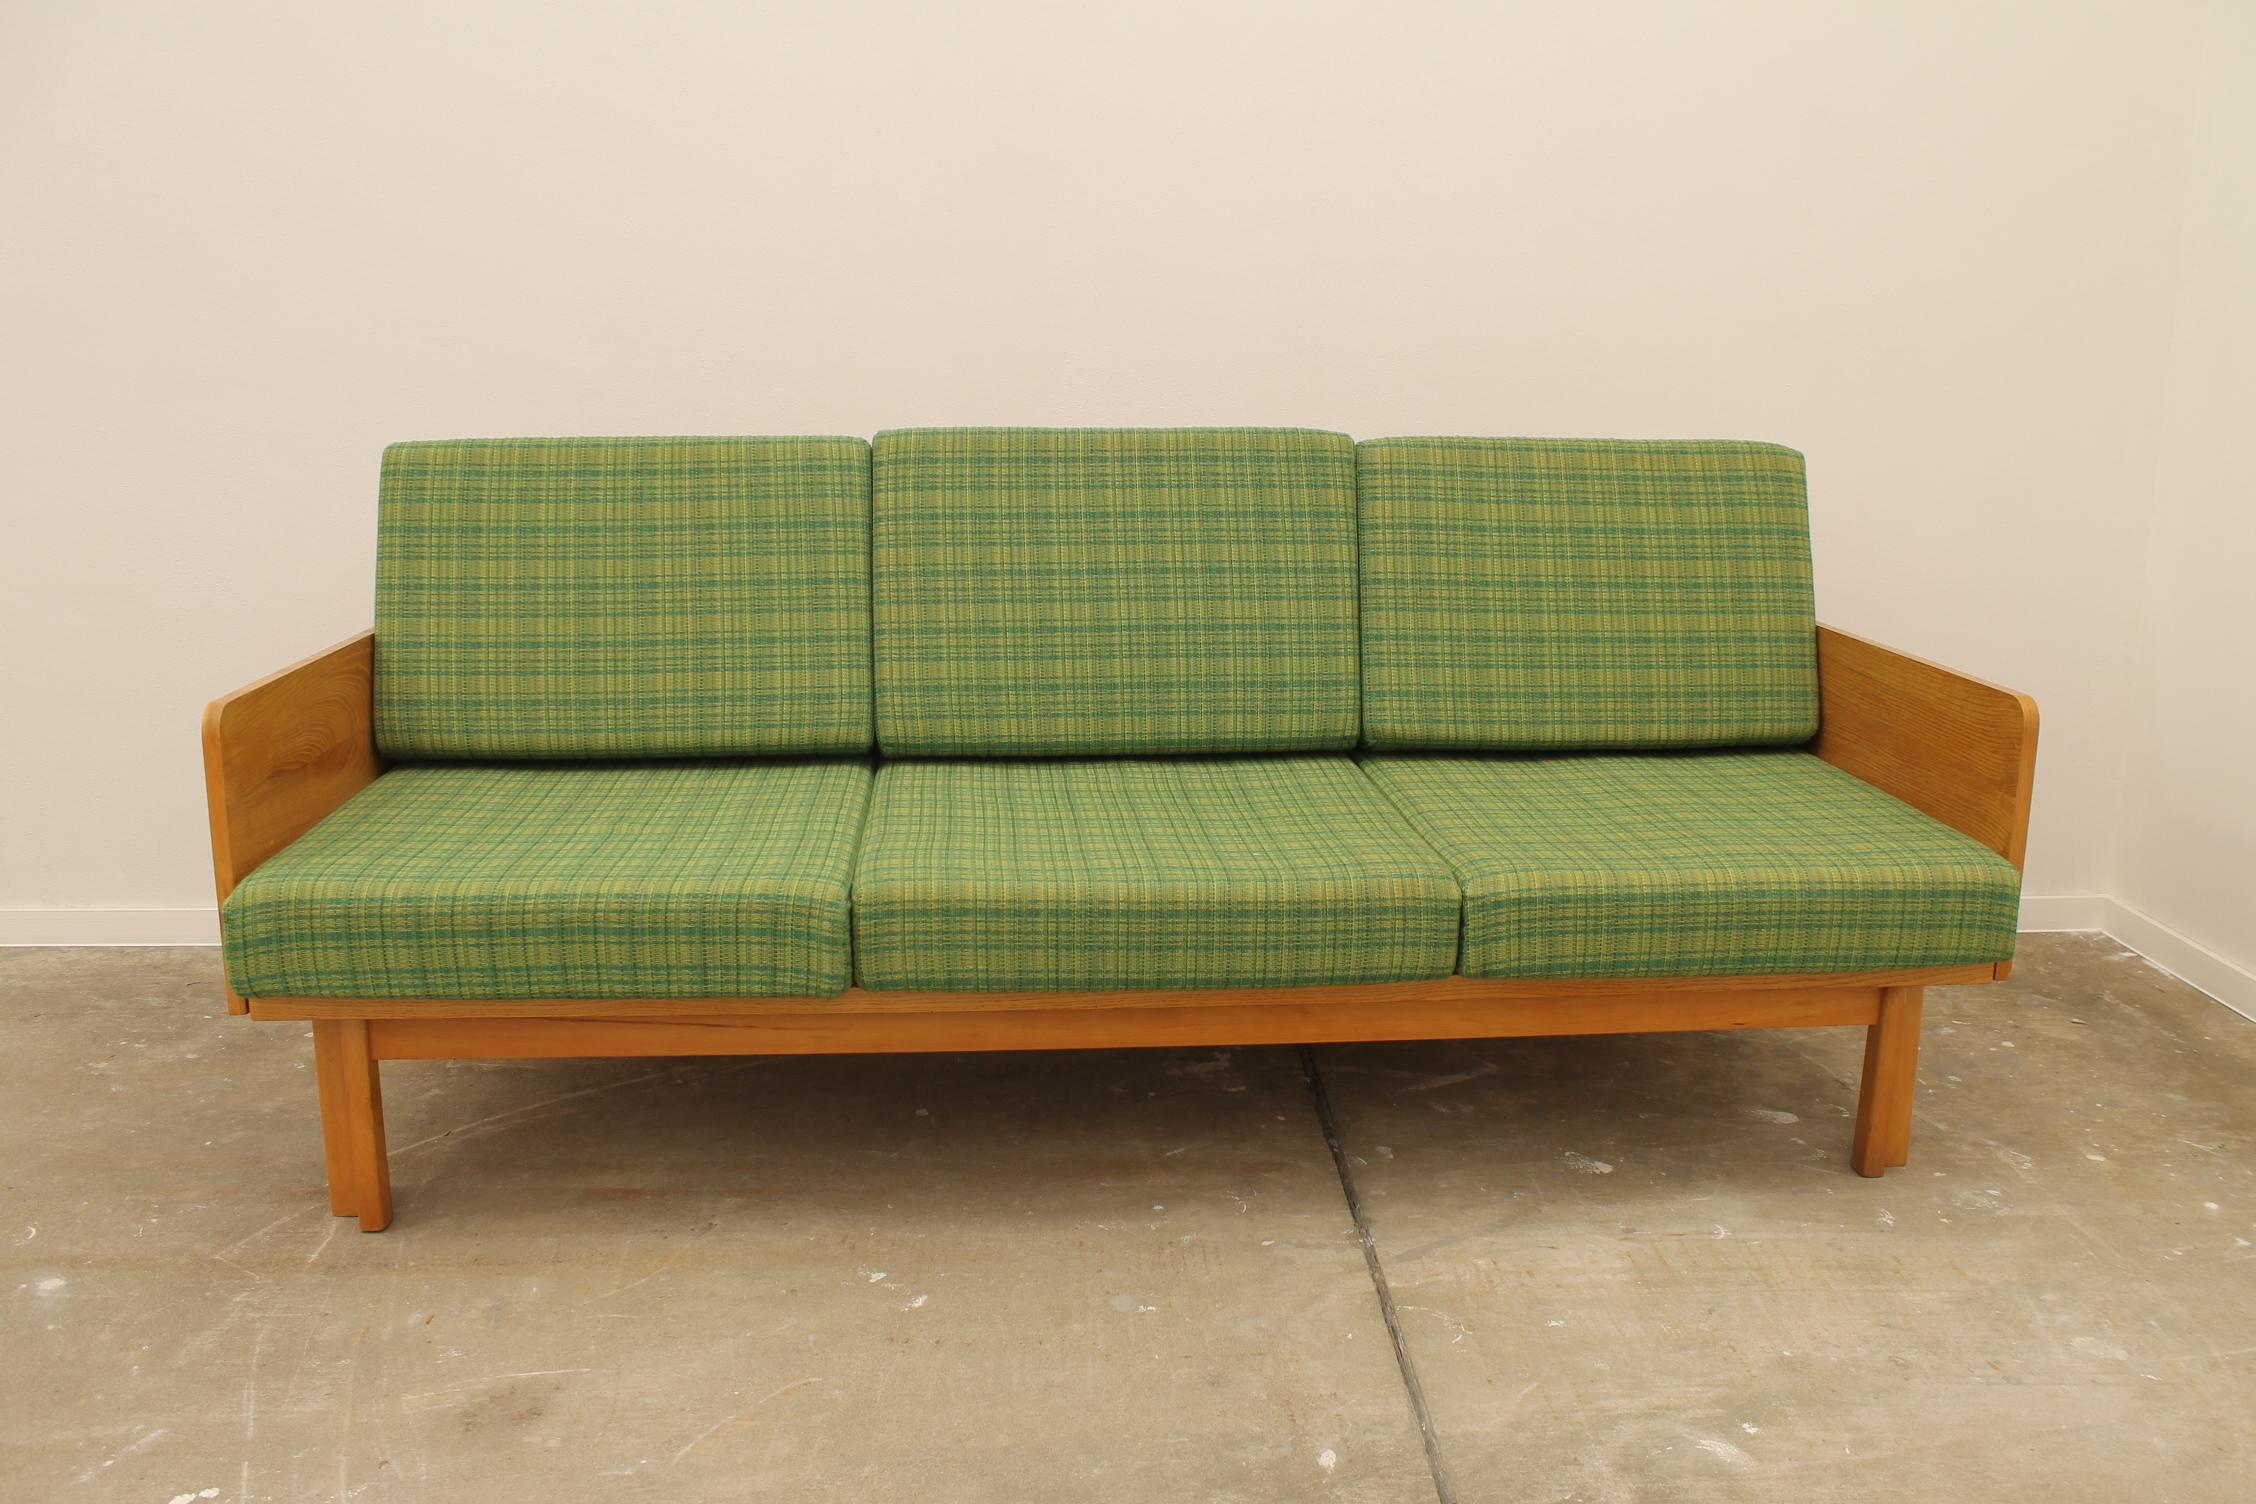 Midcentury sofa bed,made by Jitona company in the former Czechoslovakia in the 1970s. The sofa has a beechwood structure and green upholstery, it´s in excellent Vintage condition, showing slight signs of age and using.

Measures : 
Lenght: 199